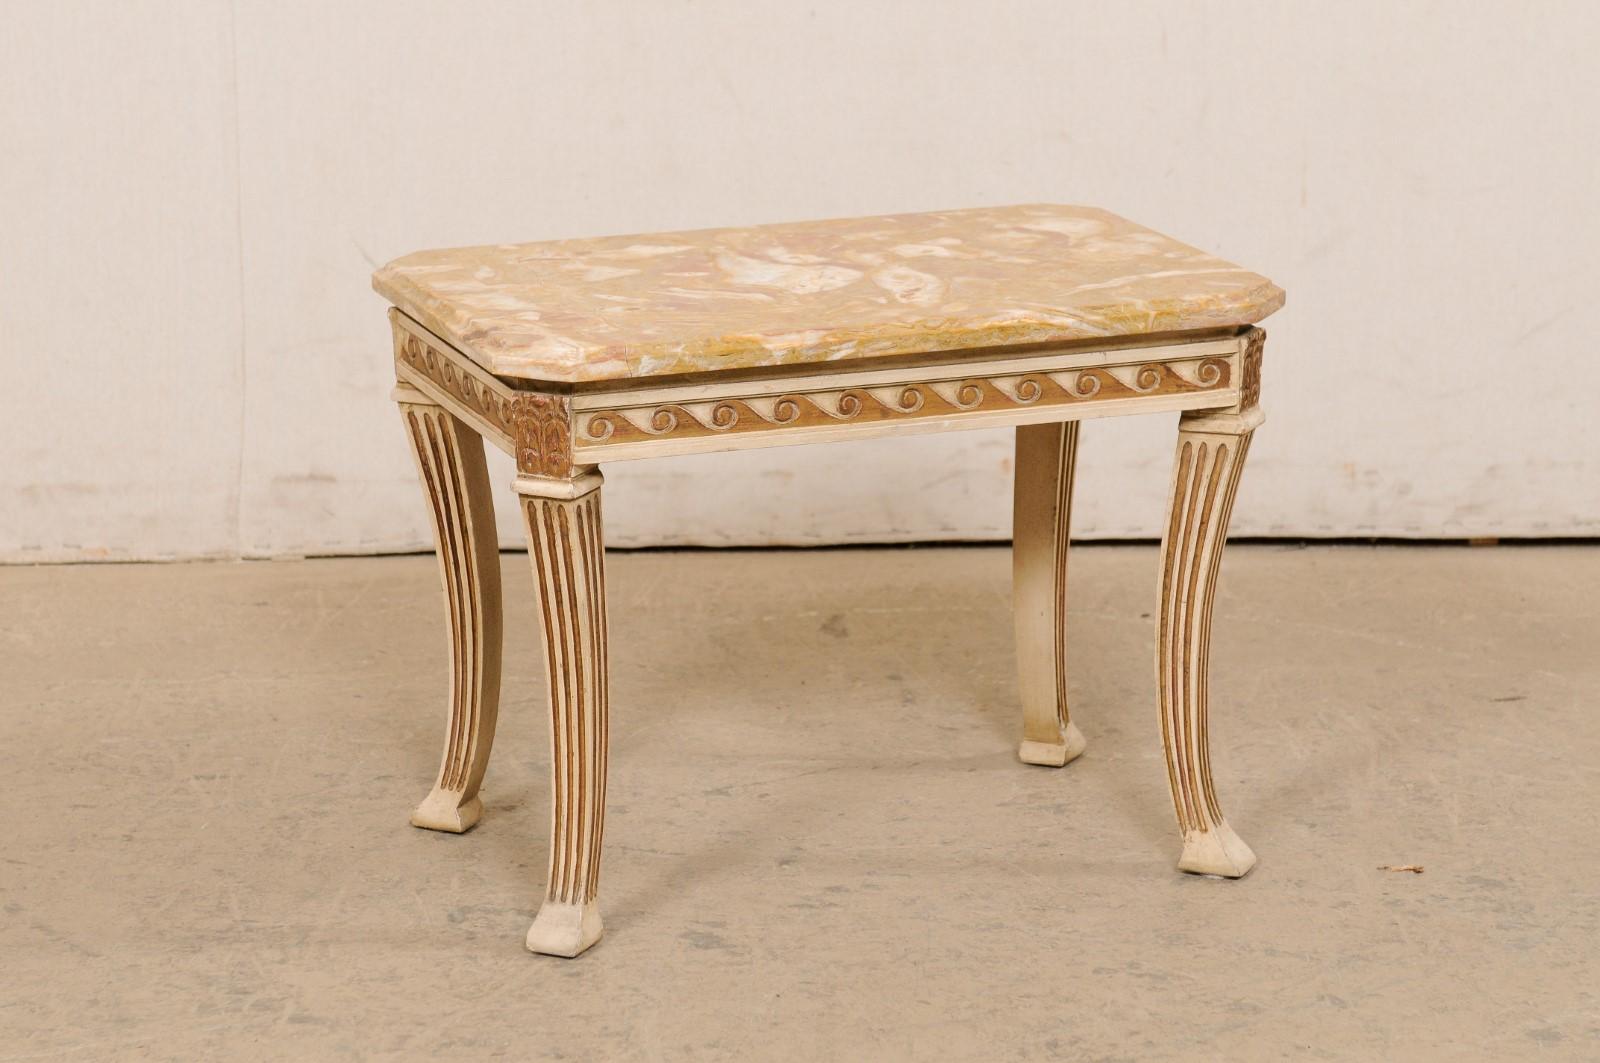 A French nicely carved drinks table with original marble top. This cute little vintage side (or small coffee table) from France features a rectangular-shaped marble top with chamfered edging and canted corners, which rests atop a skirt adorn with